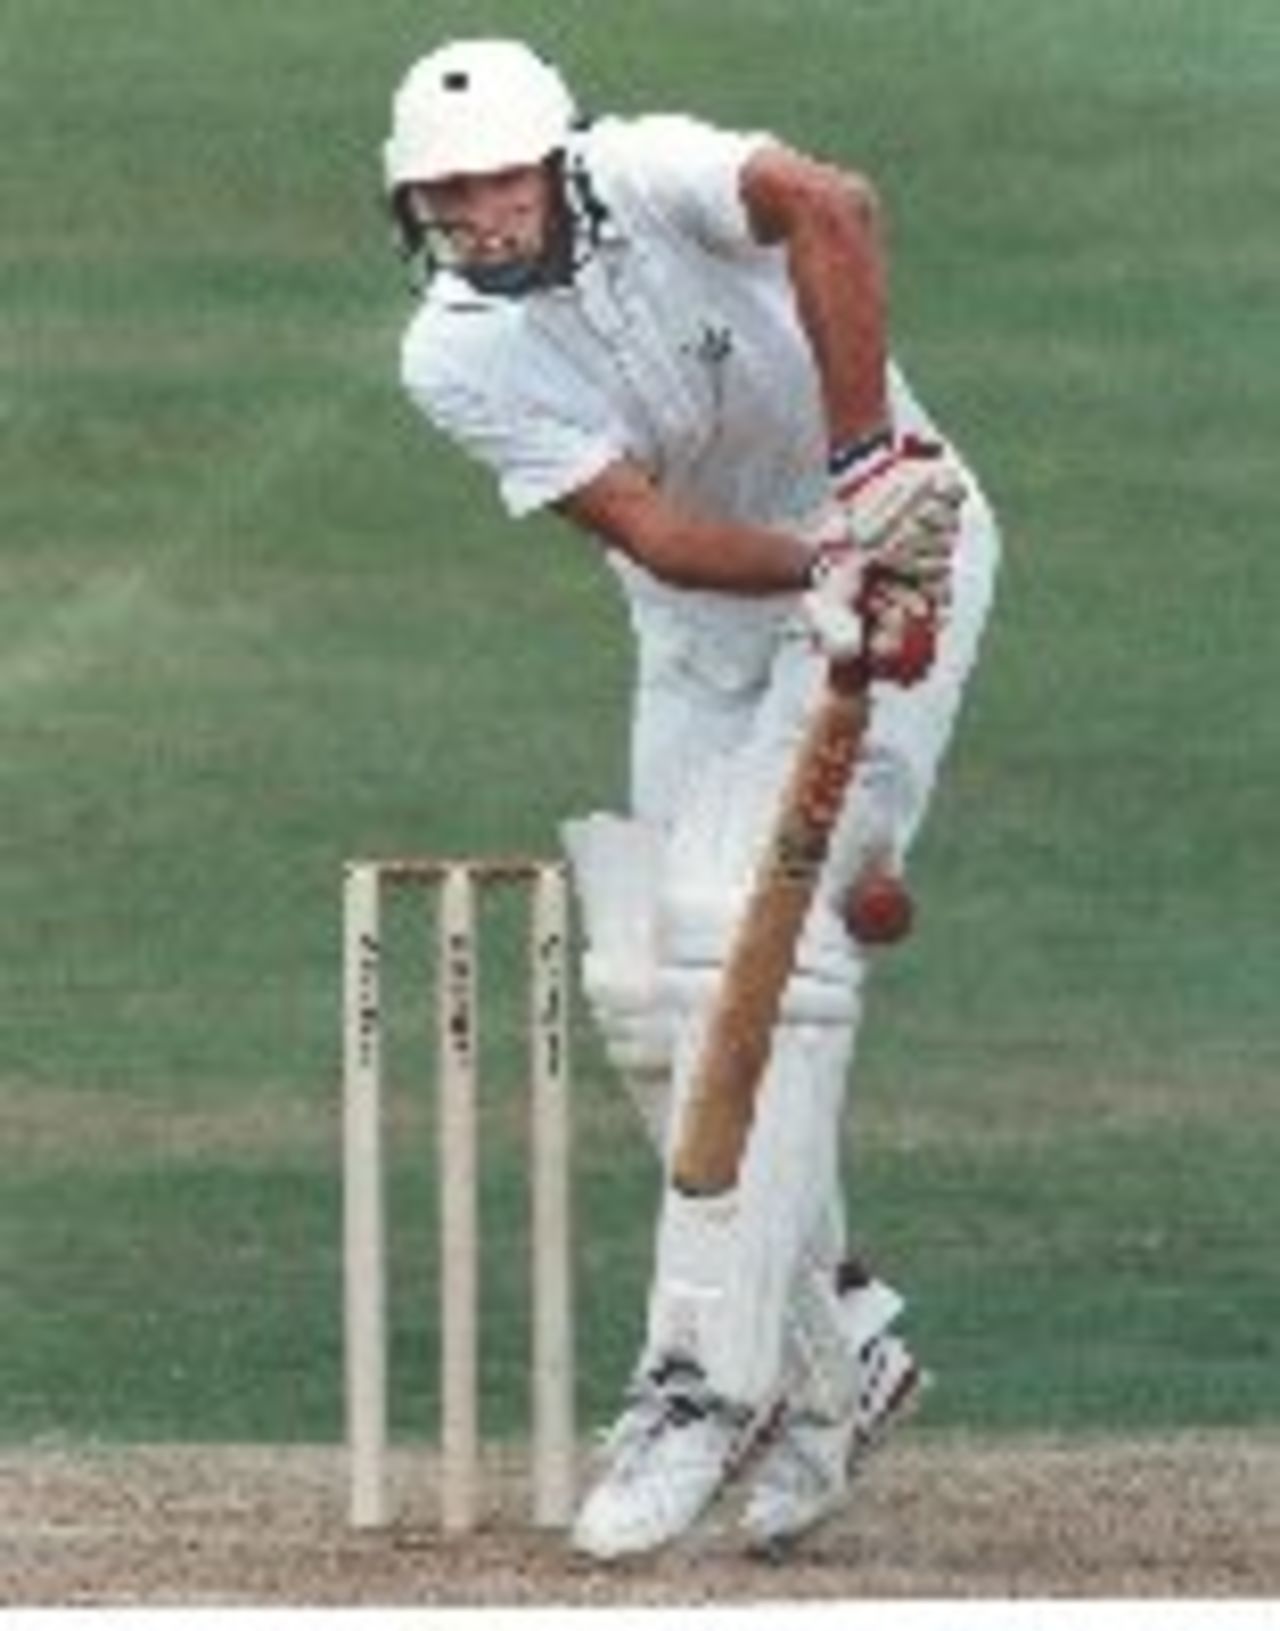 Roland Lefebvre attempts to leg glance during Glamorgan's Nat West tie with Sussex at Hove in 1993